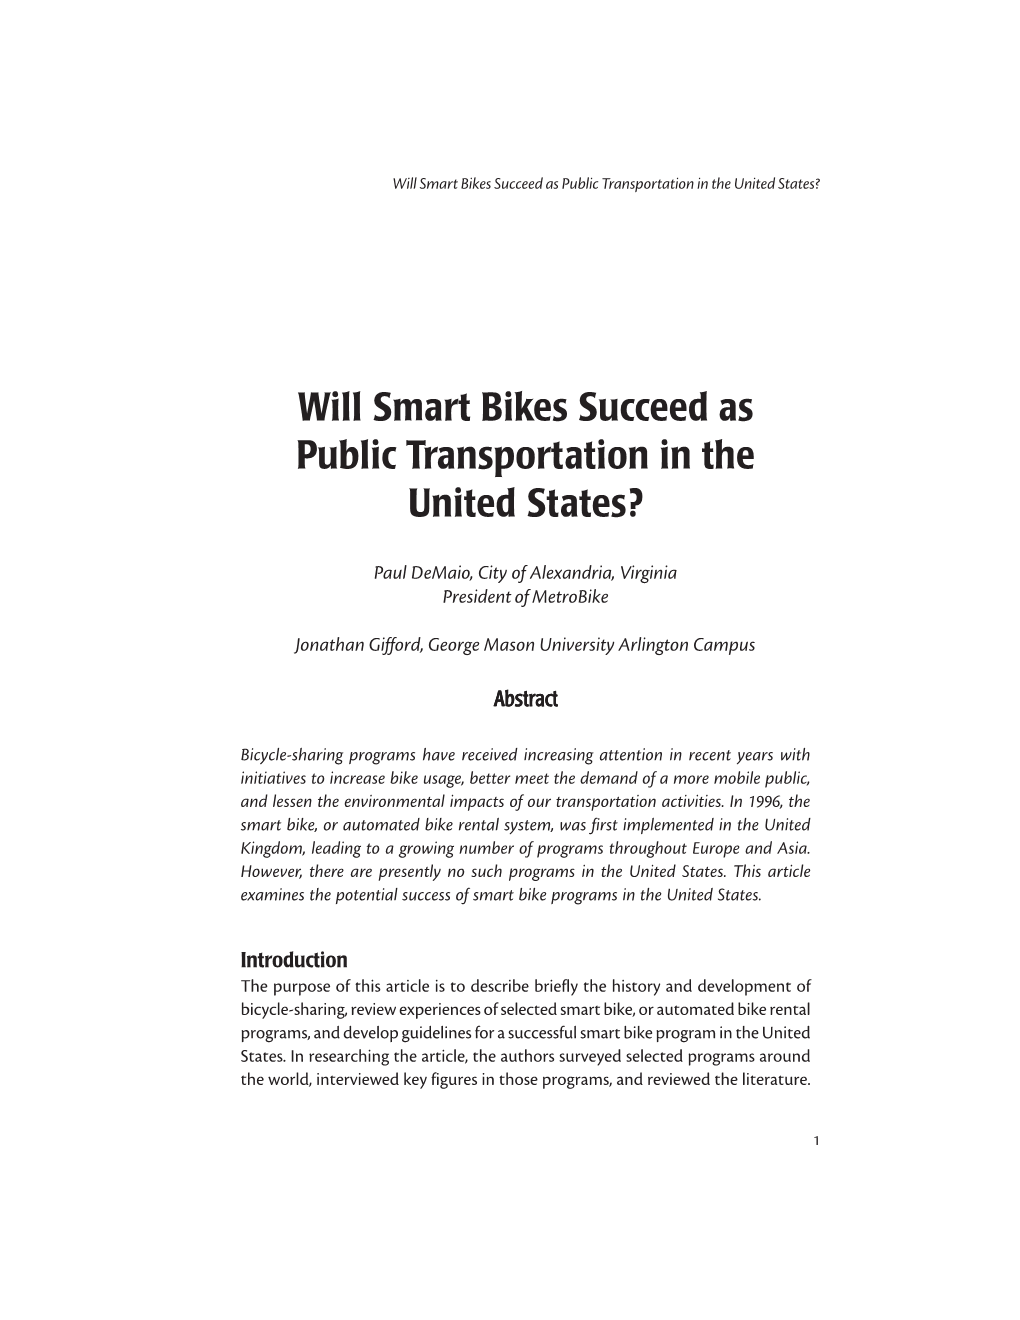 Will Smart Bikes Succeed As Public Transportation in the United States?